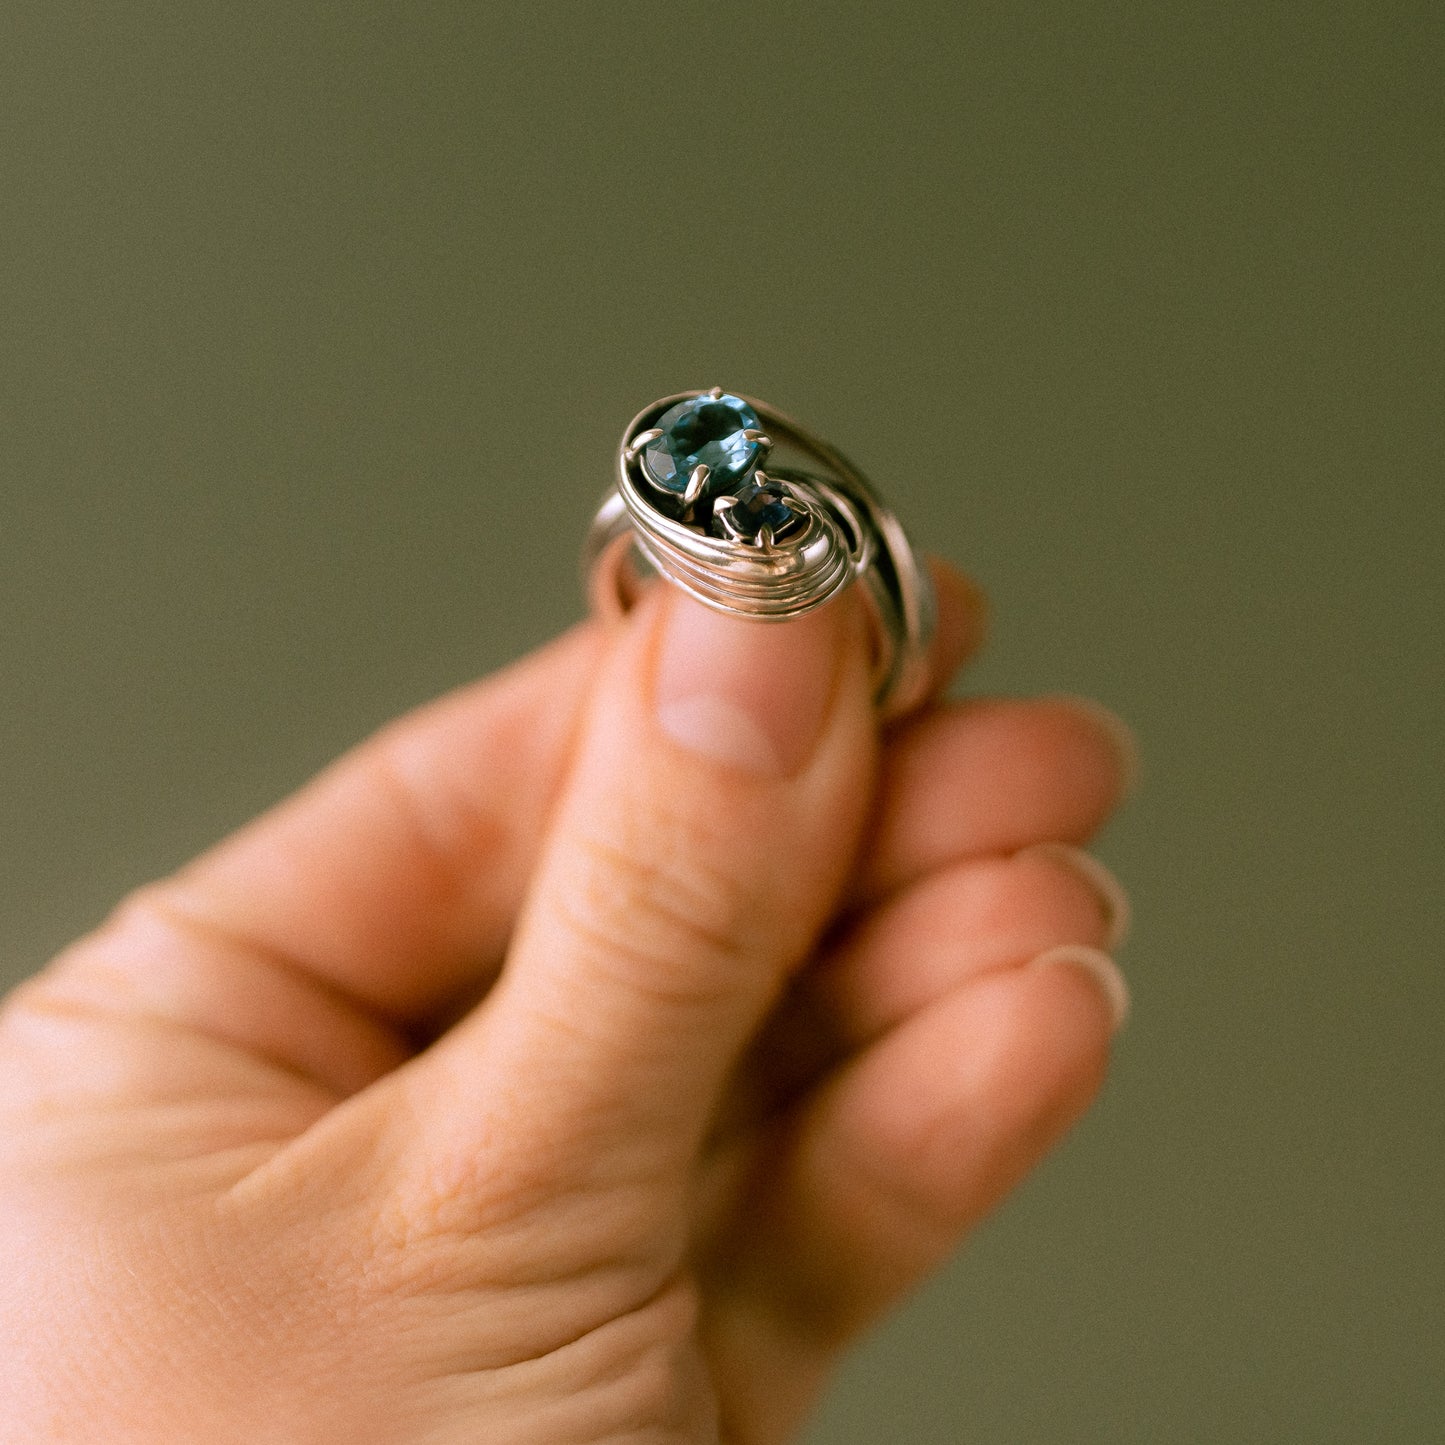 One of a Kind Drift Sterling Silver Ring with Swiss Blue Topaz and Sapphire - Size S